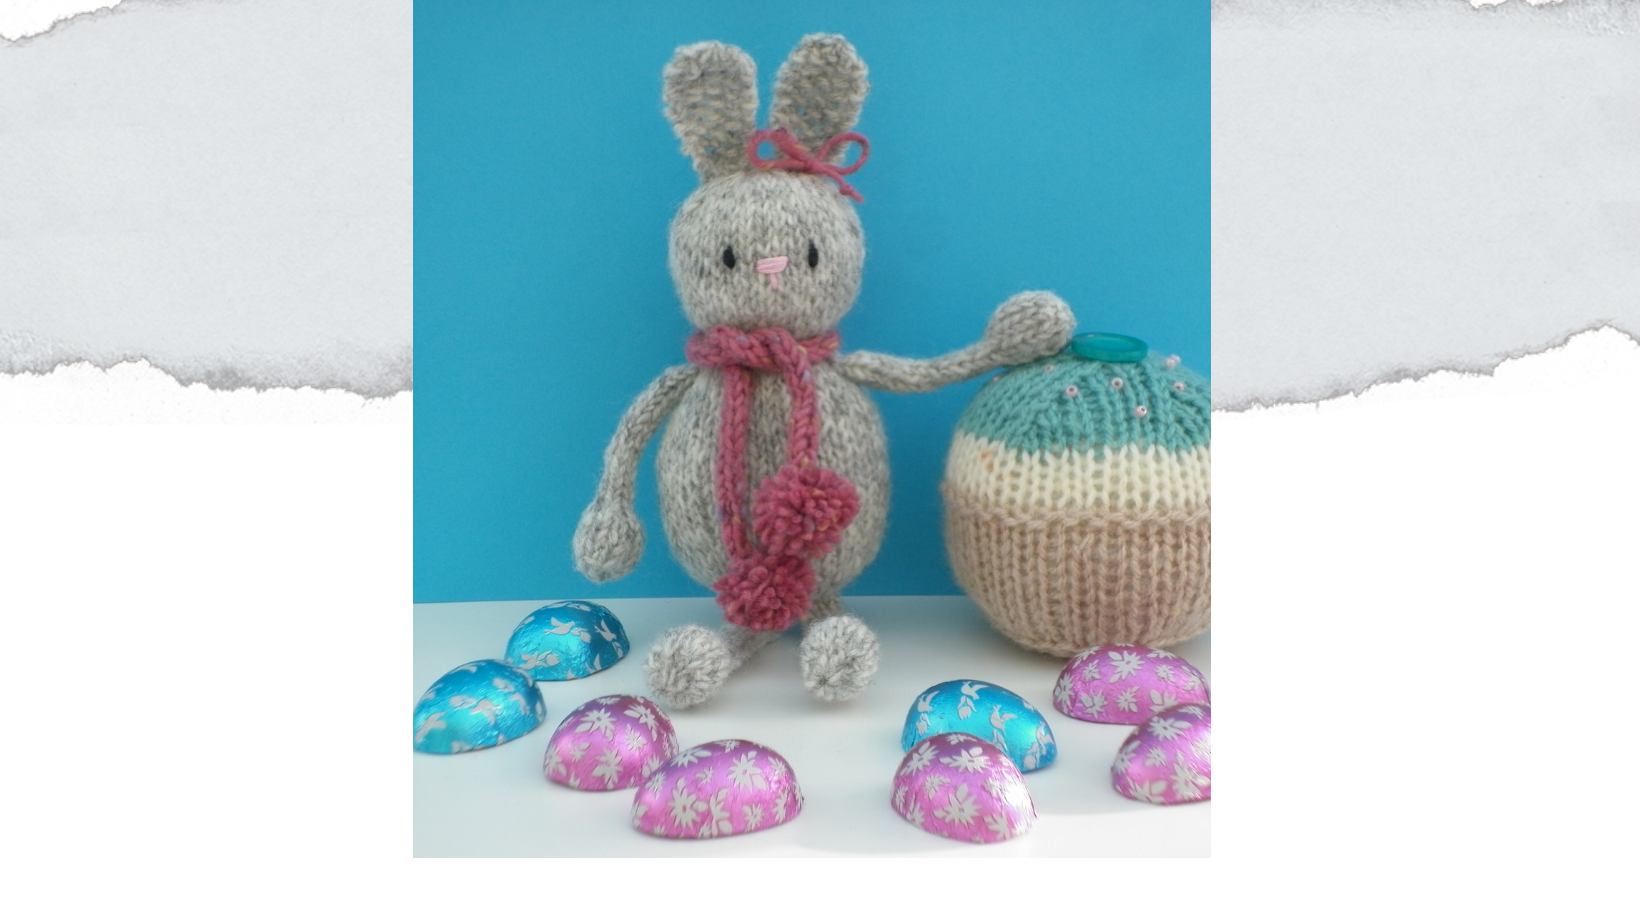 Knitted easter bunny in grey yarn. with a lilac scarf with tiny pompoms. Sat next to a knitted cake with chocolate eggs scattered around.